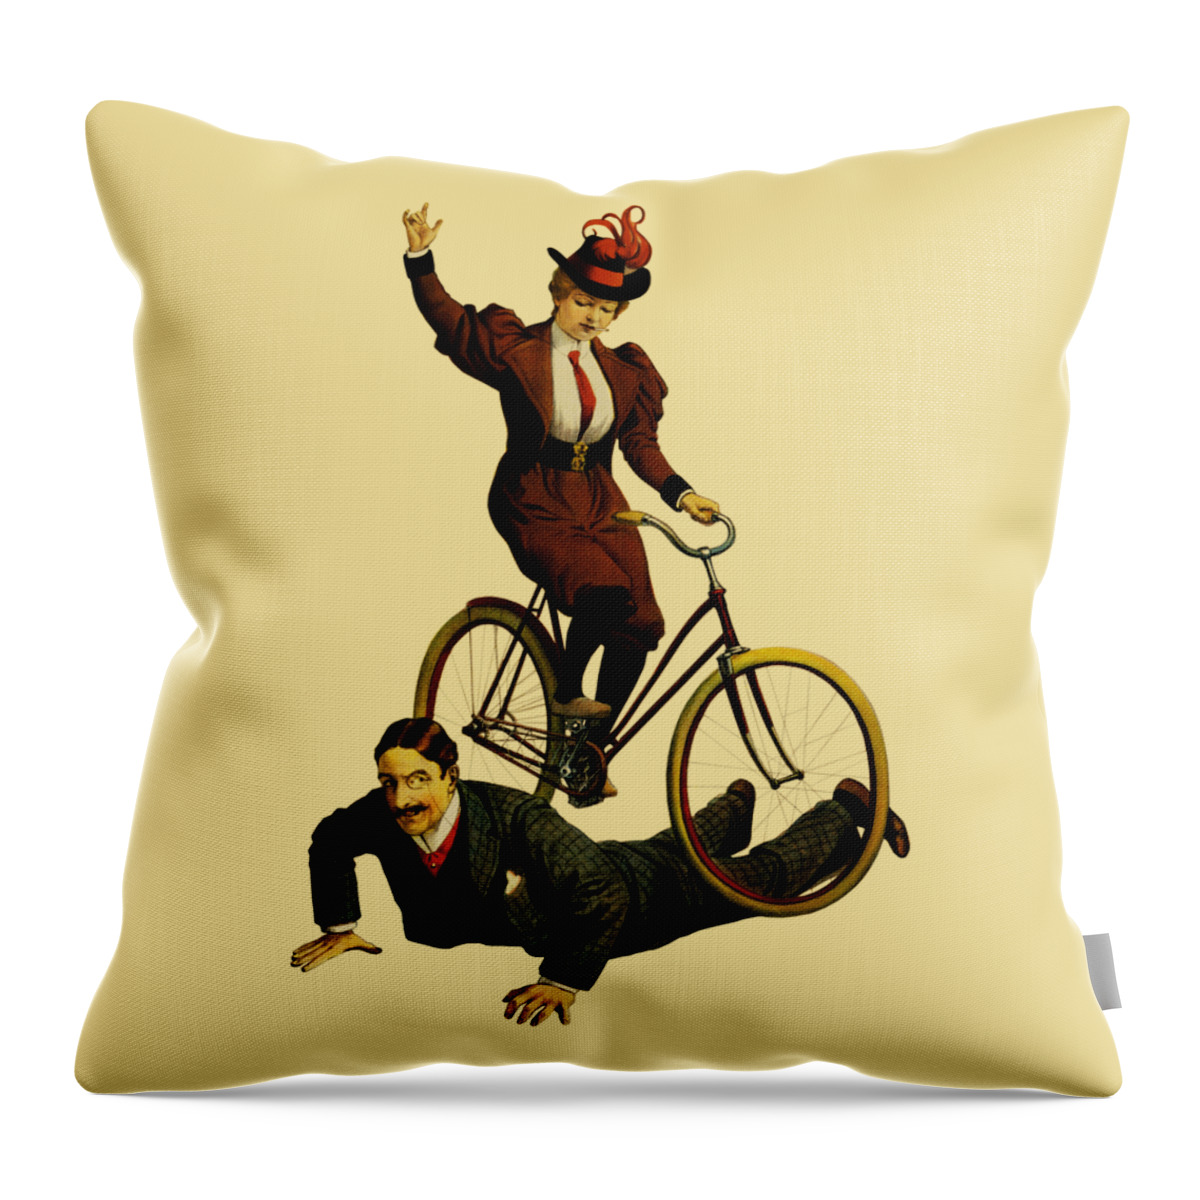 Circus Throw Pillow featuring the digital art Circus Act with Bicycle by Madame Memento